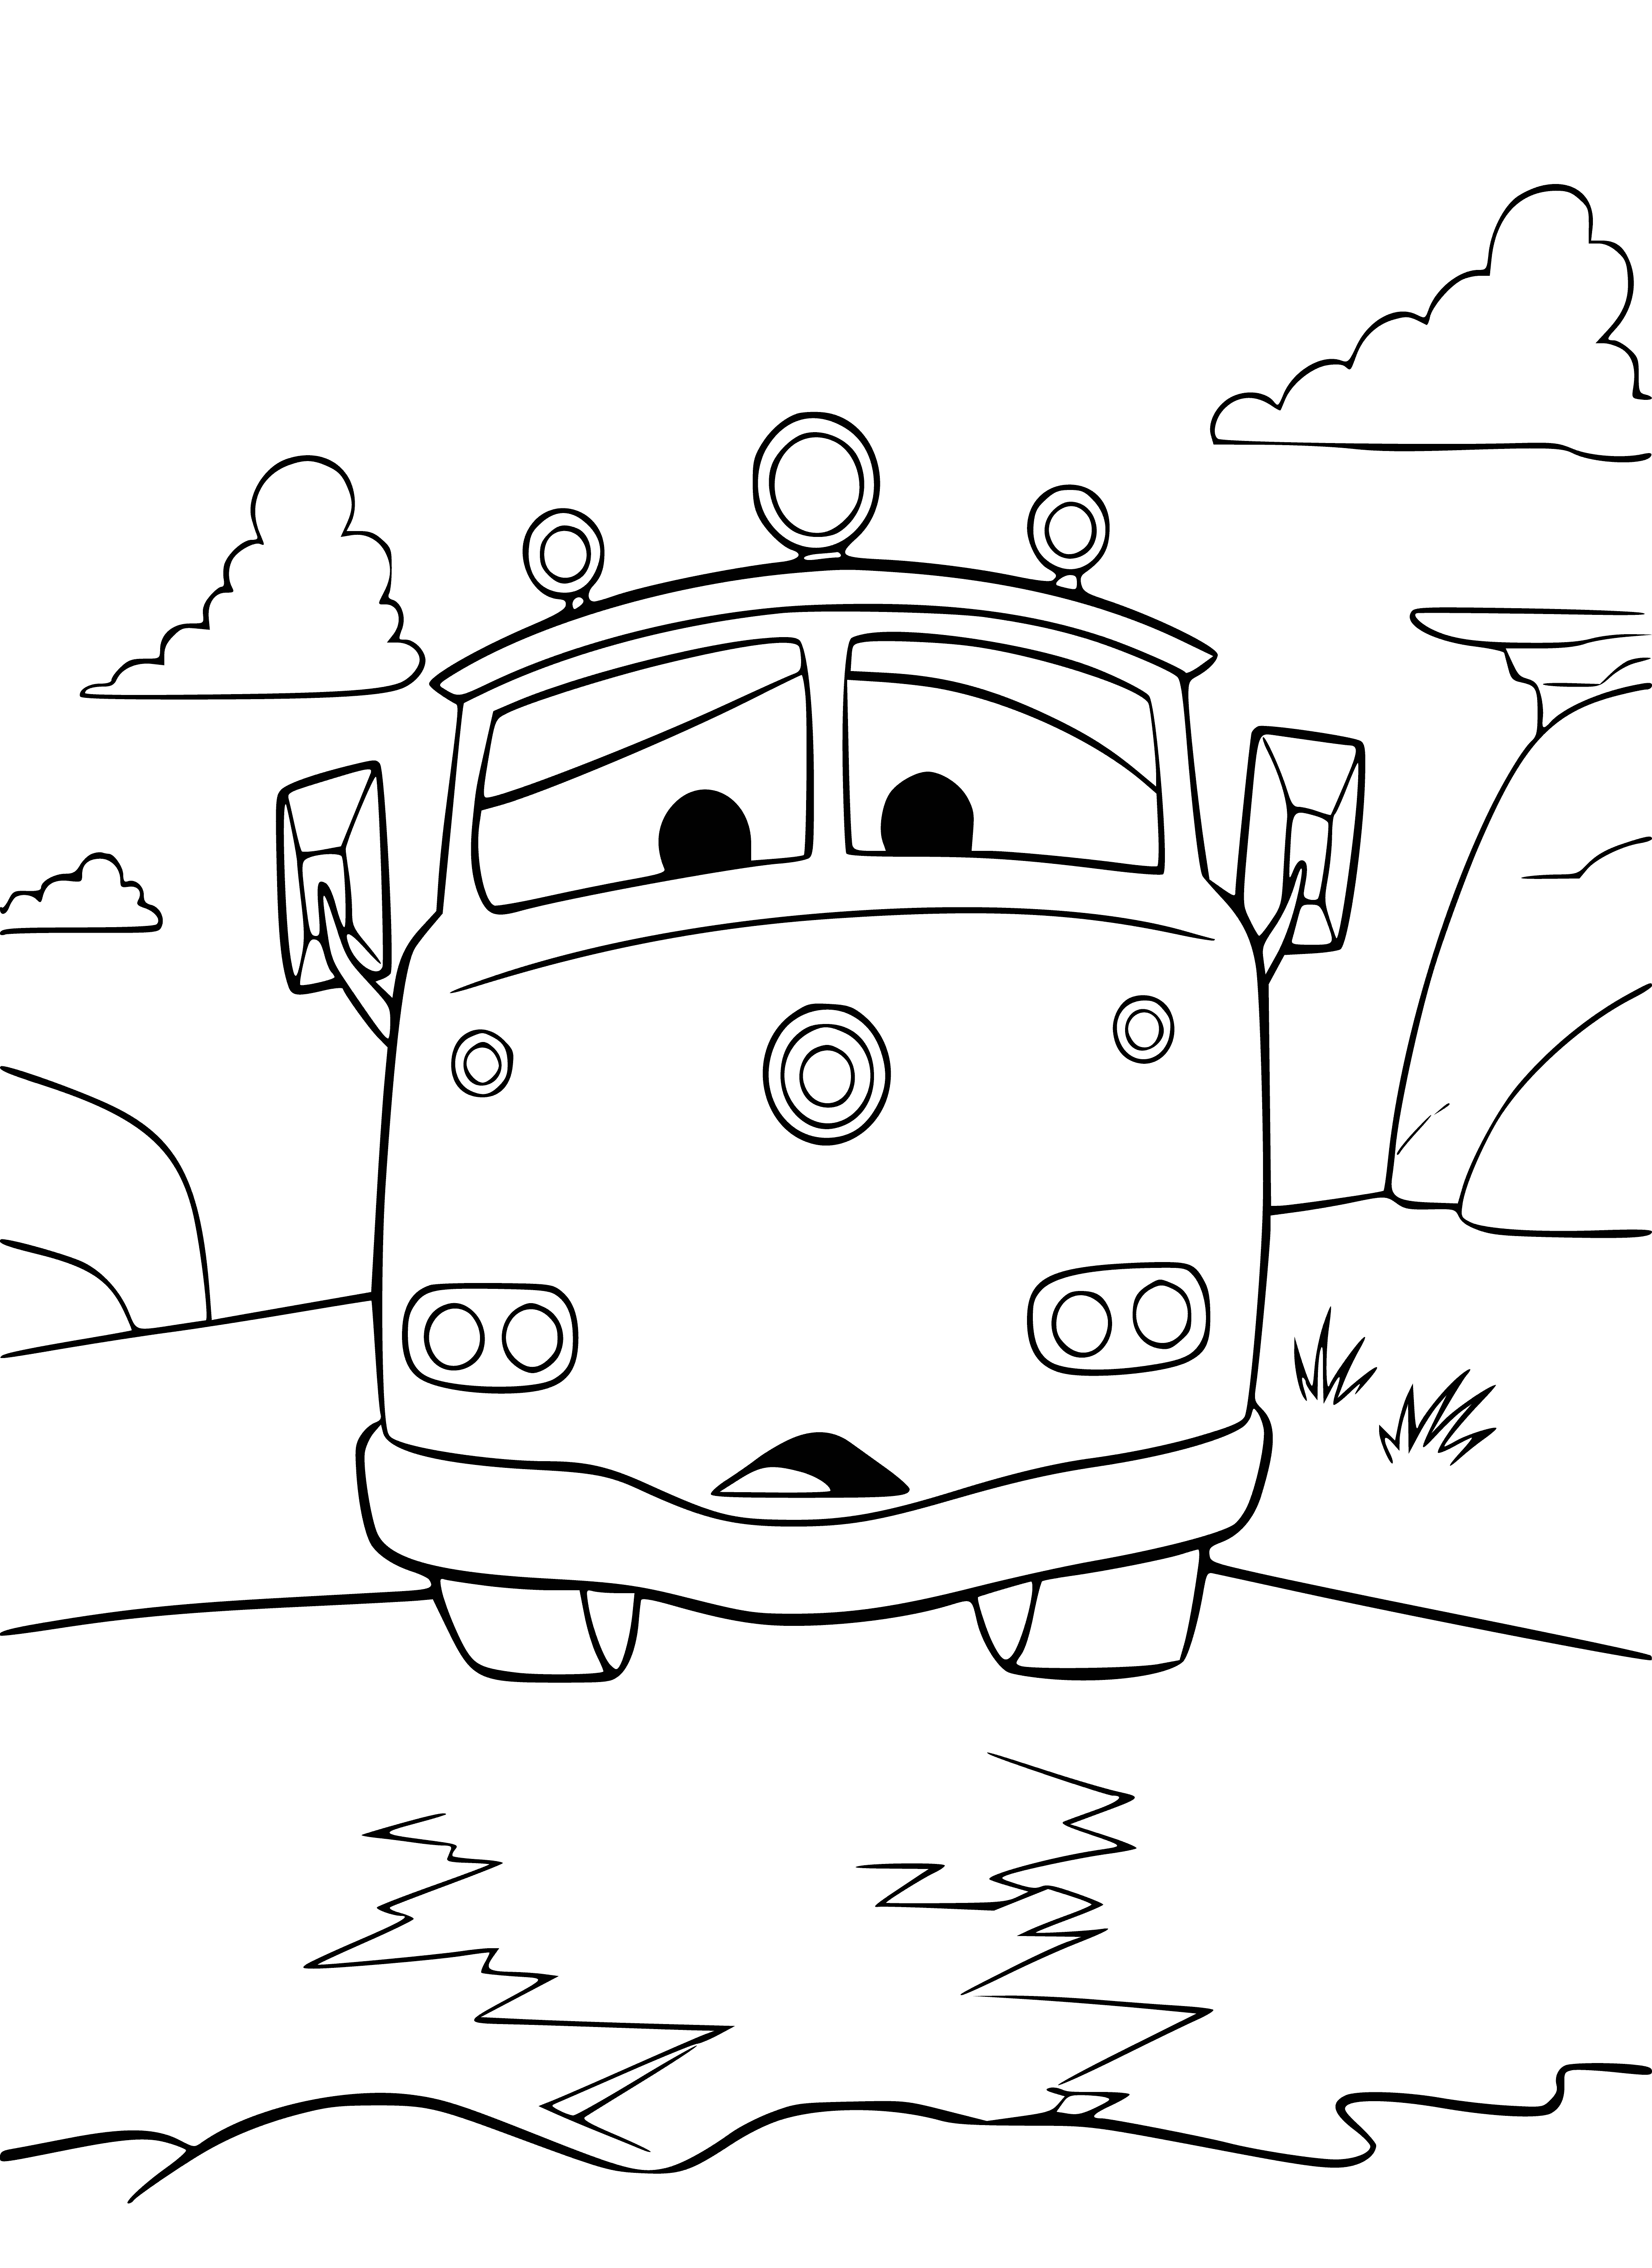 Crying fire truck coloring page